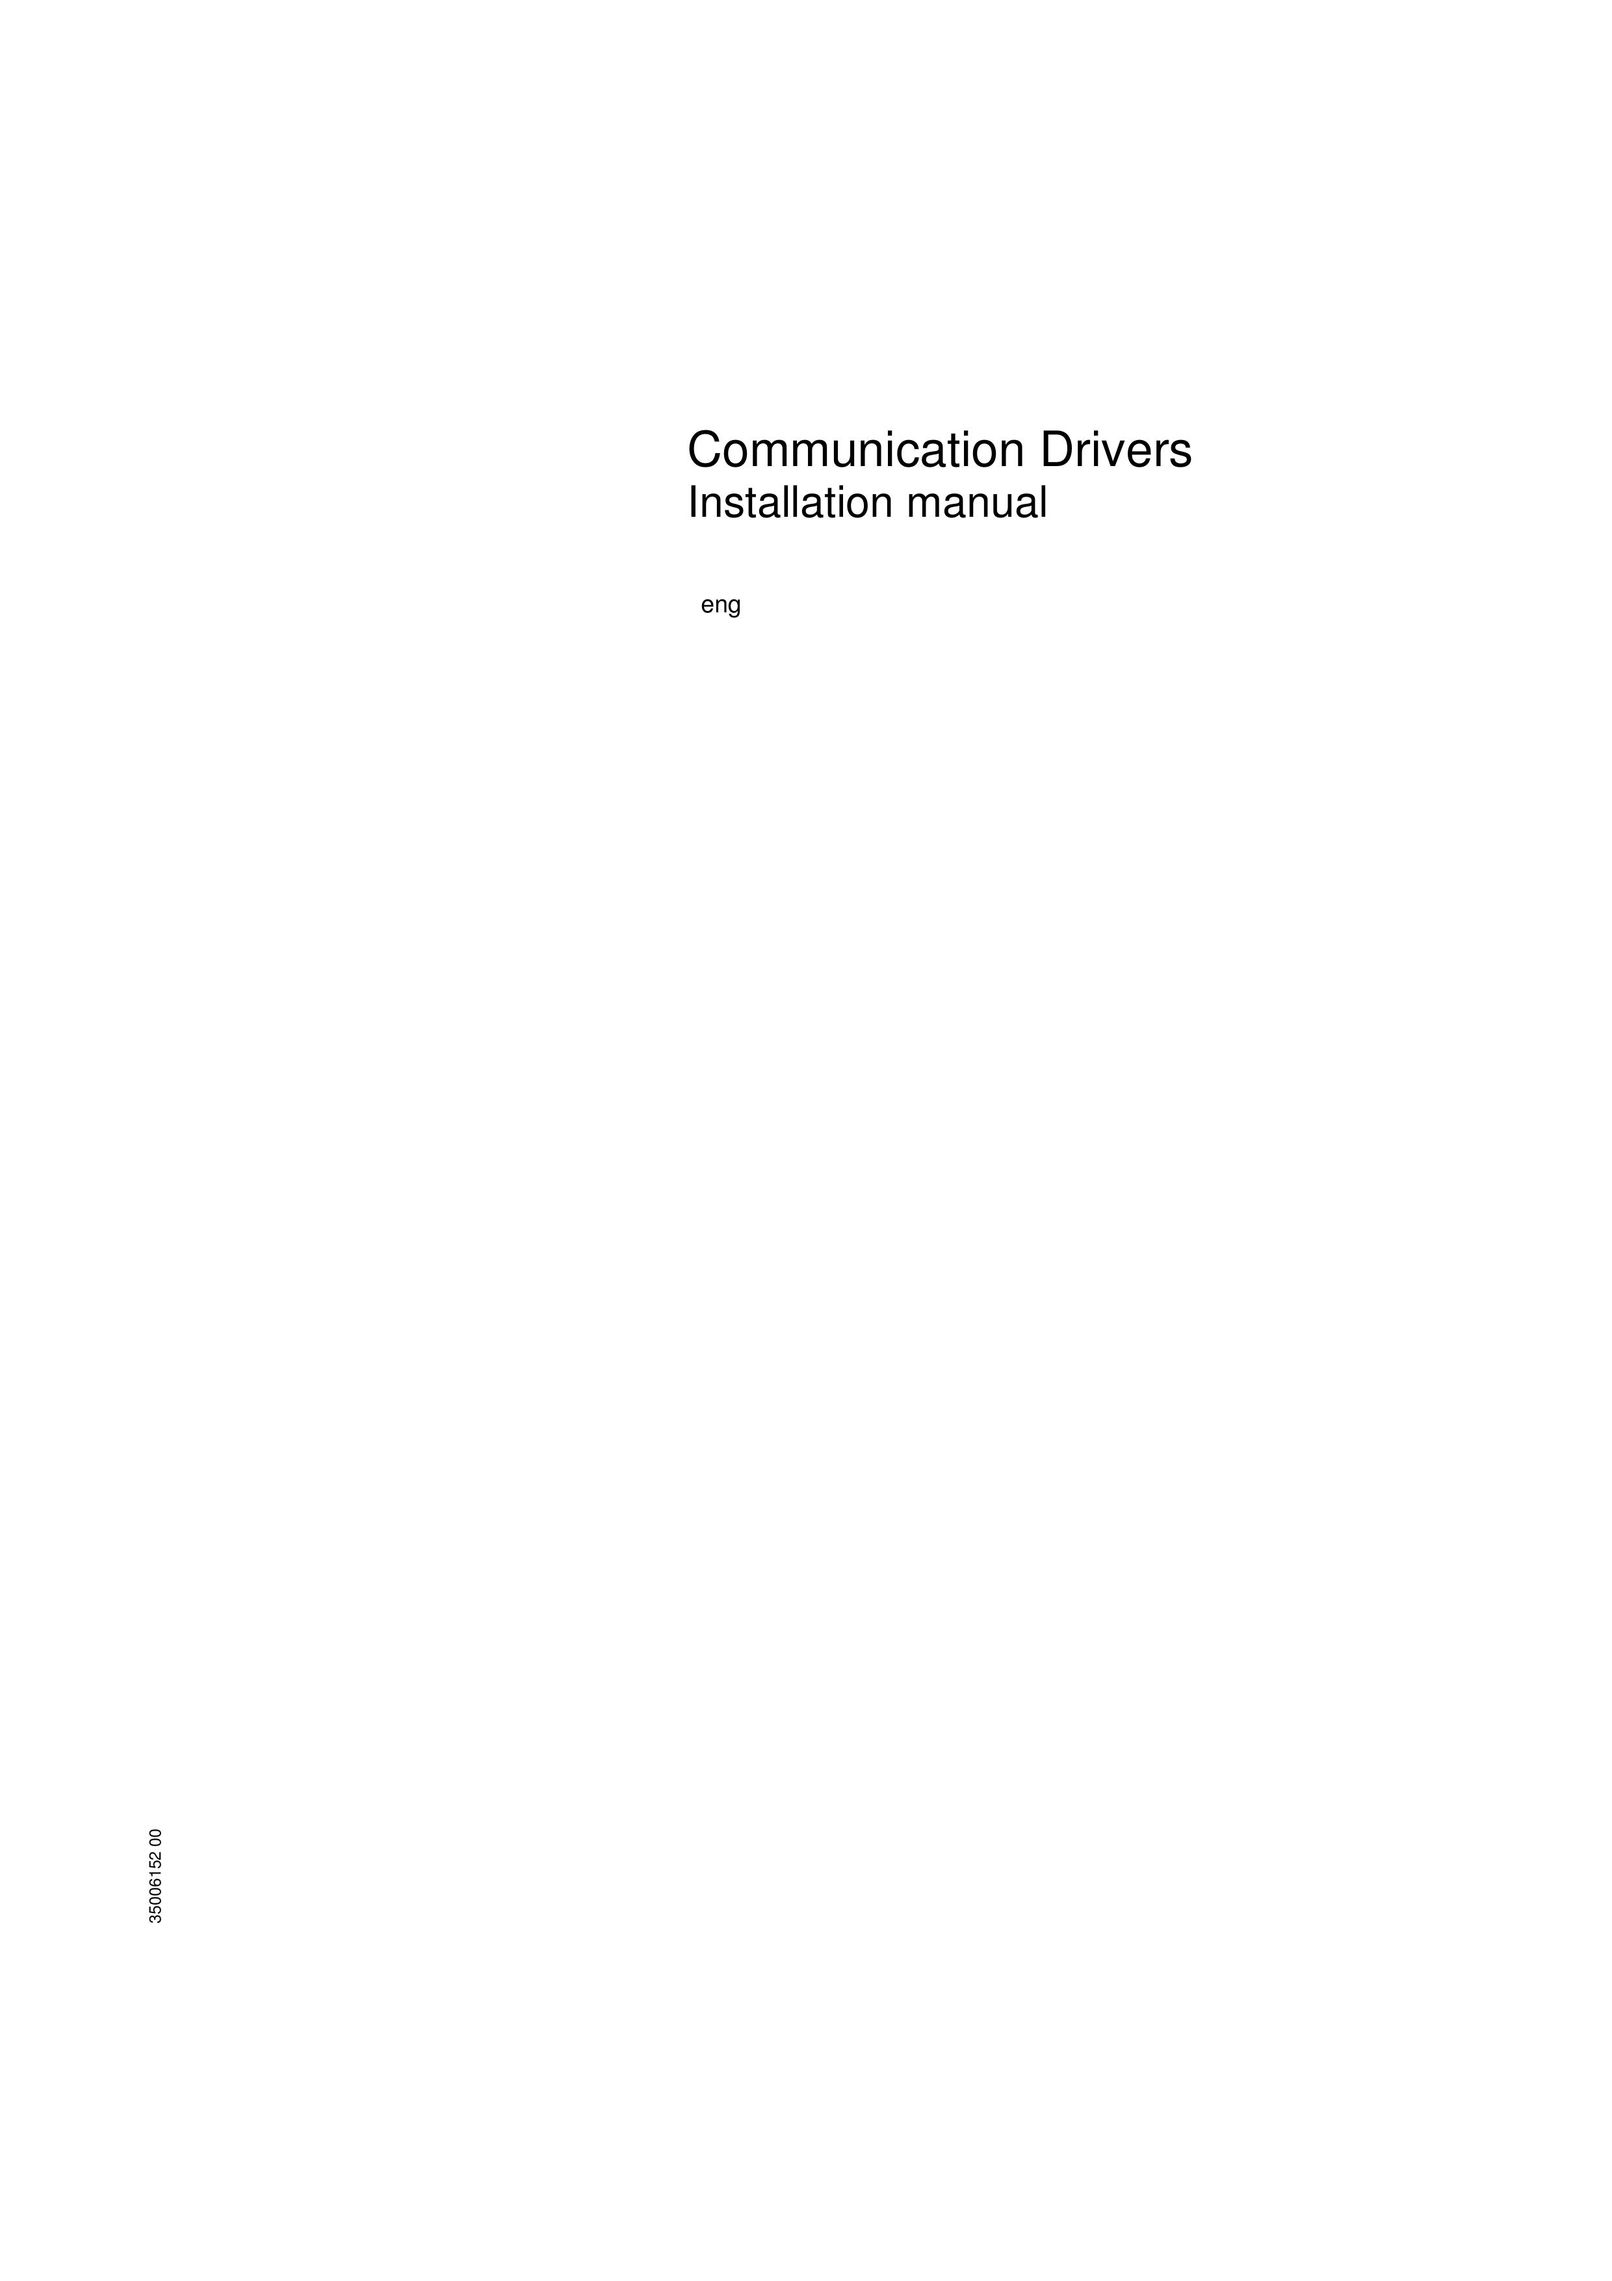 Schneider Electric Communication Drivers Computer Drive User Manual